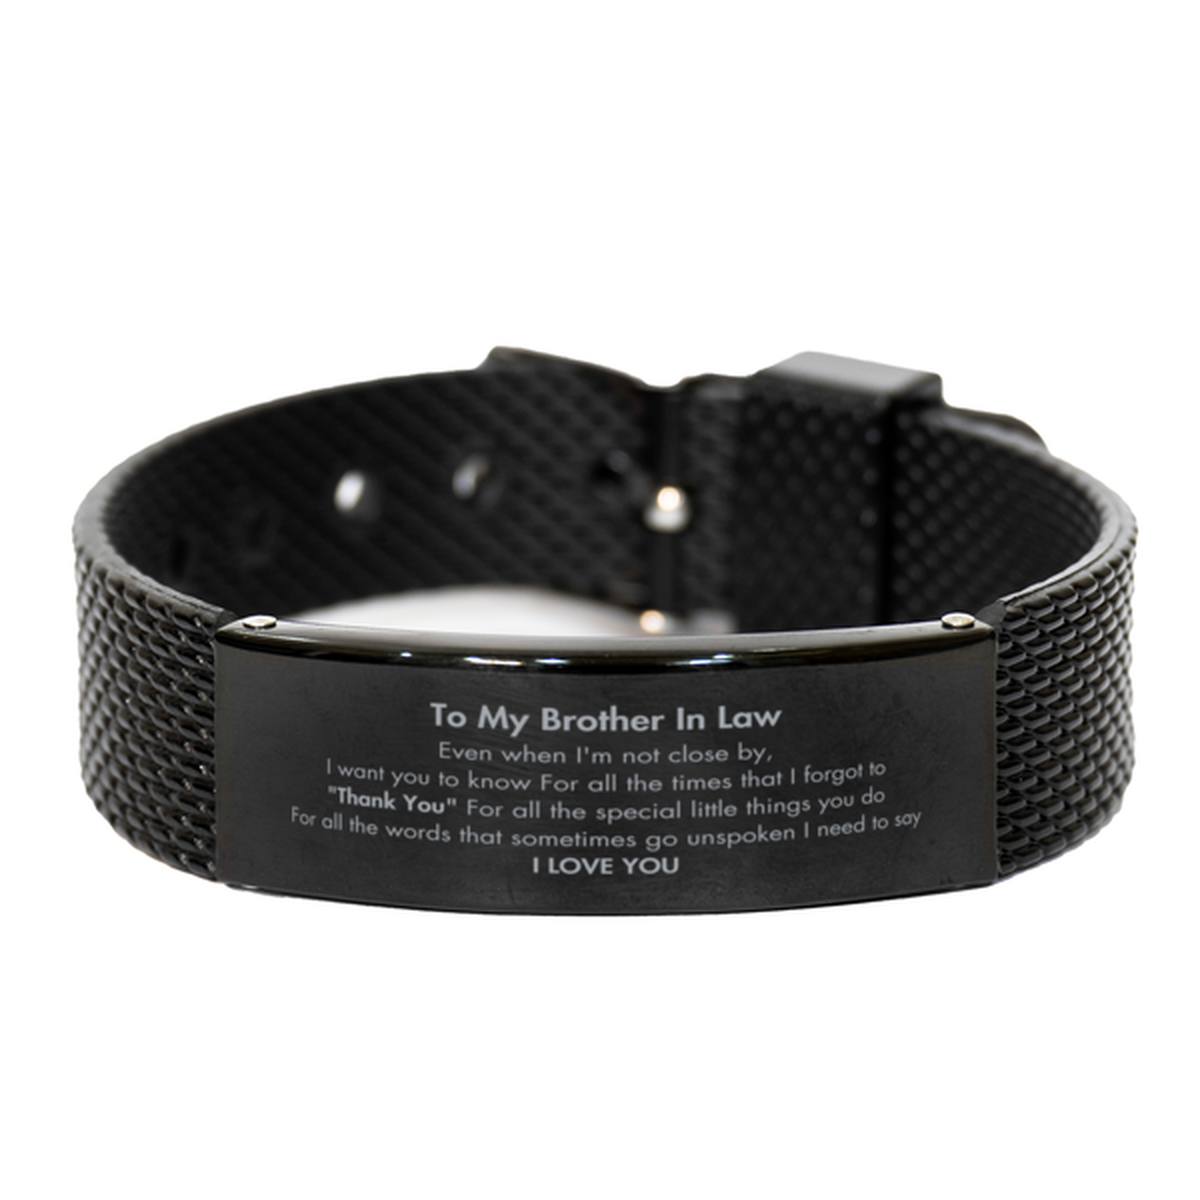 Thank You Gifts for Brother In Law, Keepsake Black Shark Mesh Bracelet Gifts for Brother In Law Birthday Mother's day Father's Day Brother In Law For all the words That sometimes go unspoken I need to say I LOVE YOU